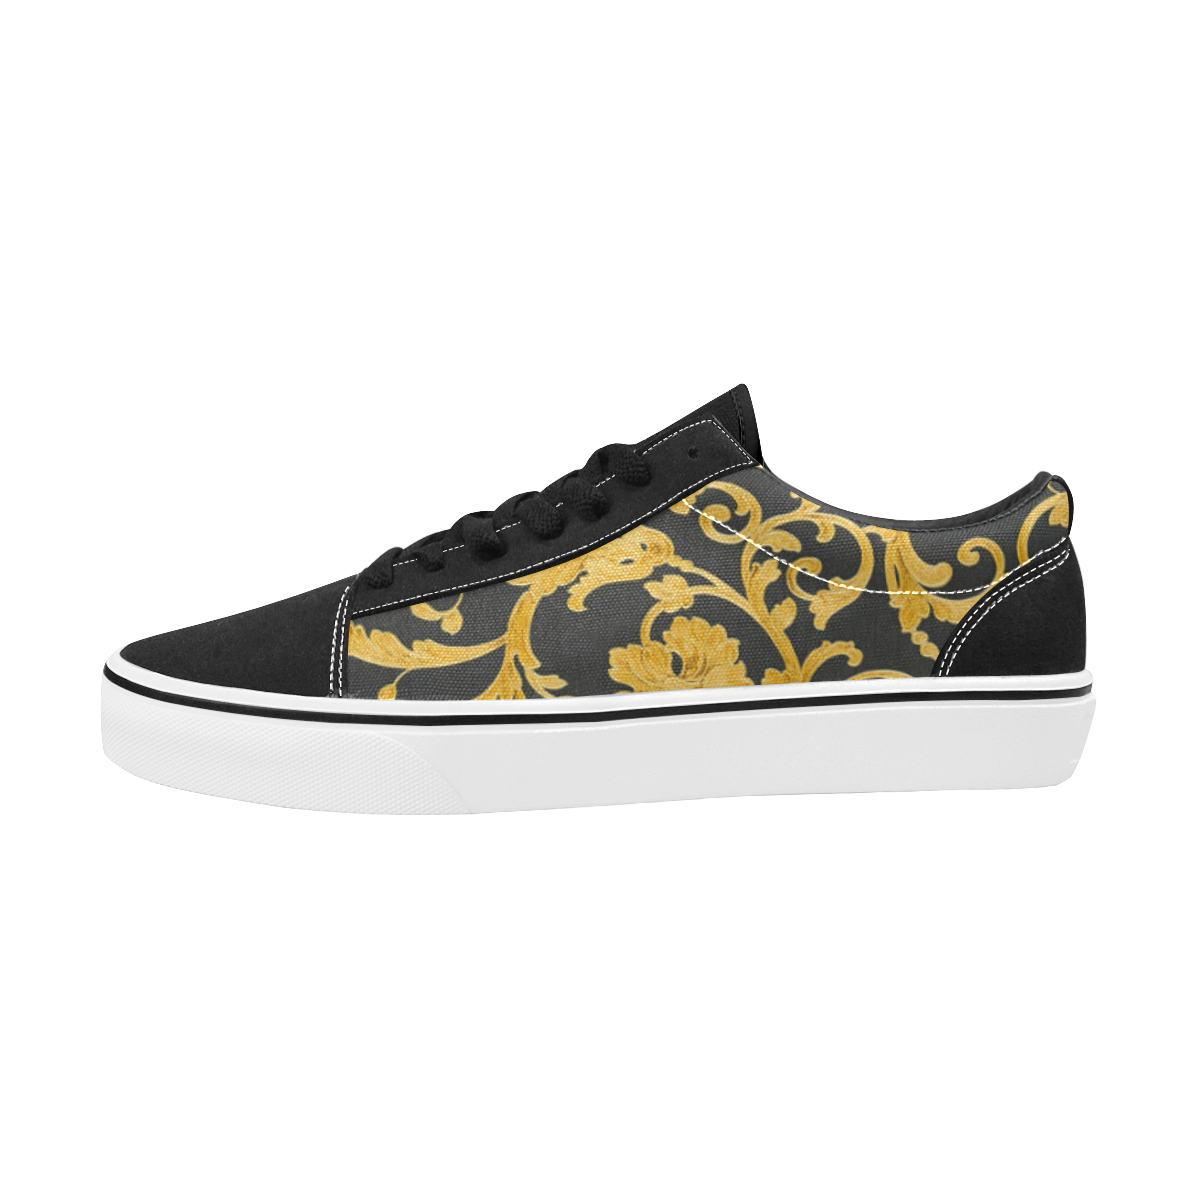 Cashmere Italian Floral print Black And Gold Women's Low Top Skateboarding Shoes/Large (Model E001-2)